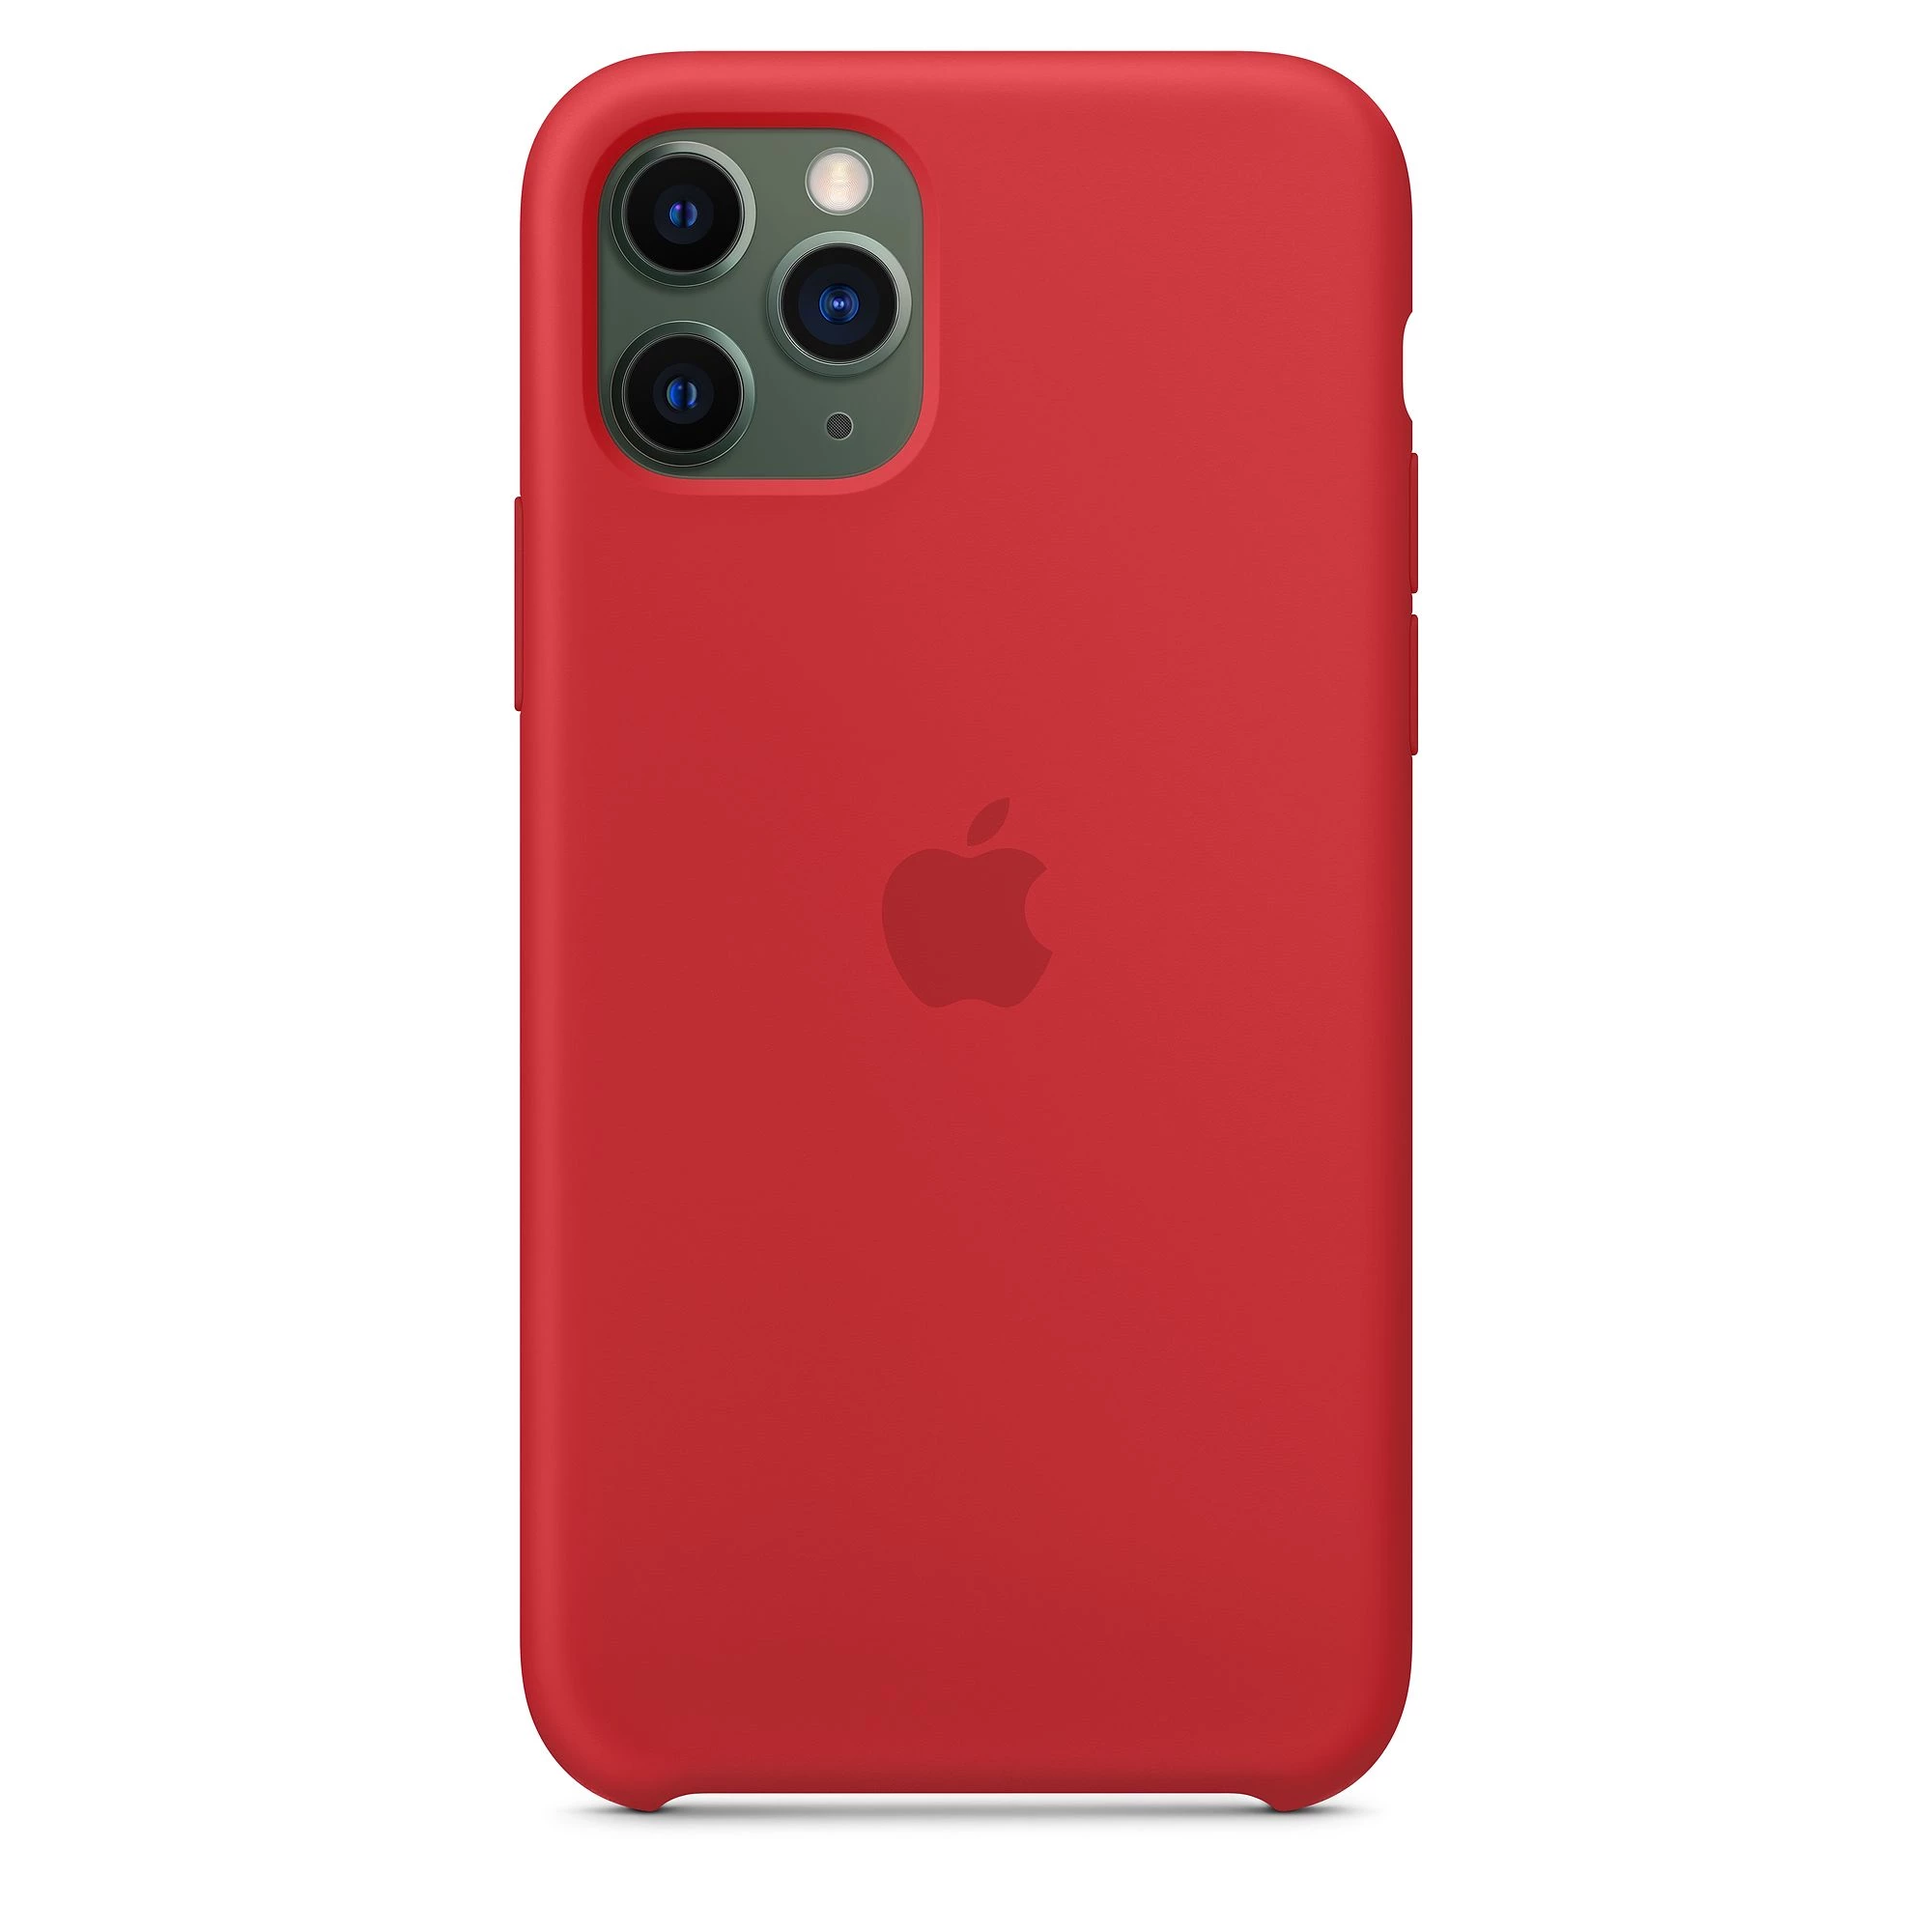 Apple iPhone 11 Pro Max Silicone Case LUX COPY - PRODUCT RED (MWYV2)